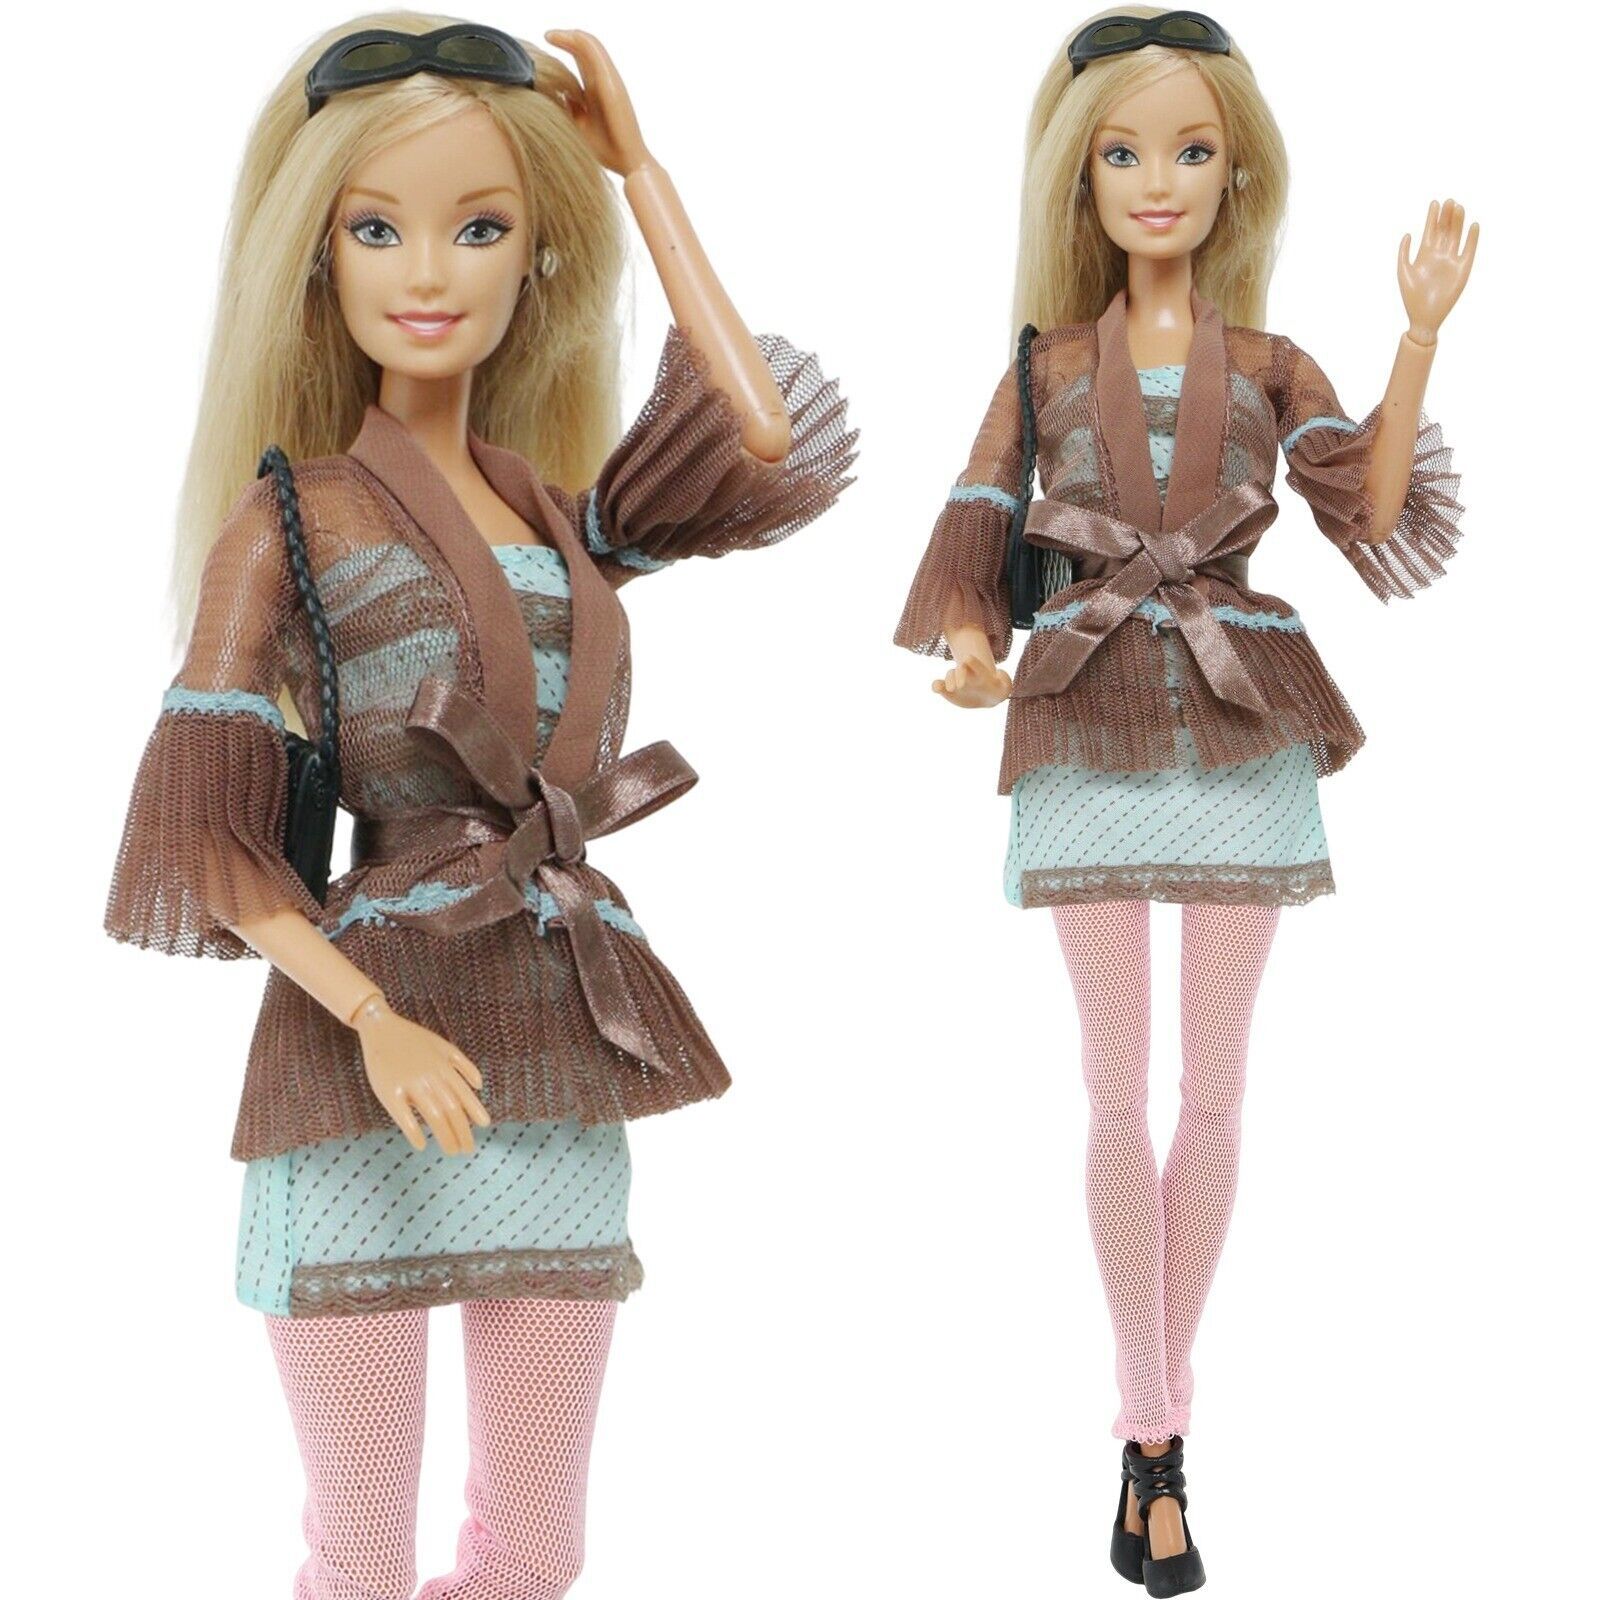 Primary image for Elegant Doll Outfit Dress Coat with Shoes Bag Stockings Glasses For Barbie Doll